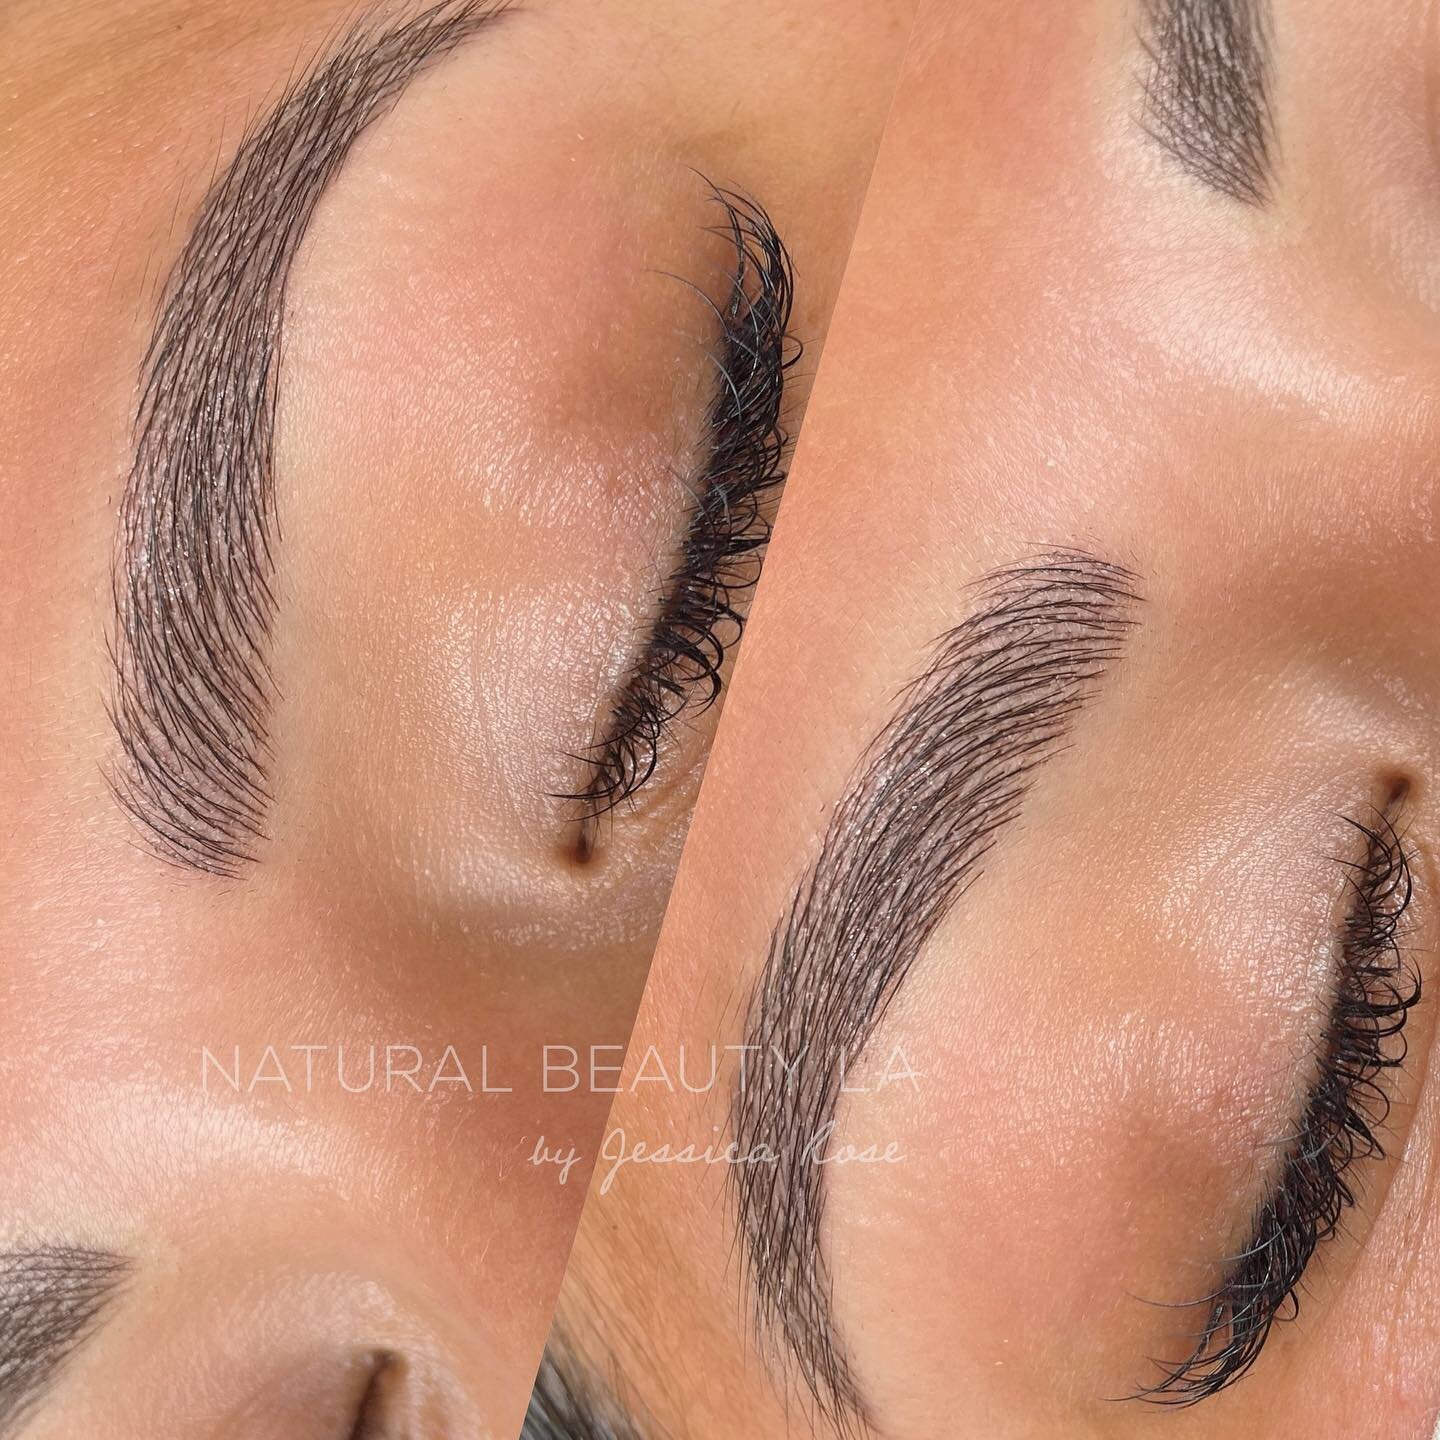 Happy Friday 🙌🏻🙌🏻🙌🏻

Was going through my pictures and found this close up picture of these perfectly natural brows. 

I had a astrology reading done last week and he said one of my key words were &ldquo;natural&rdquo;. I did laugh when out of 